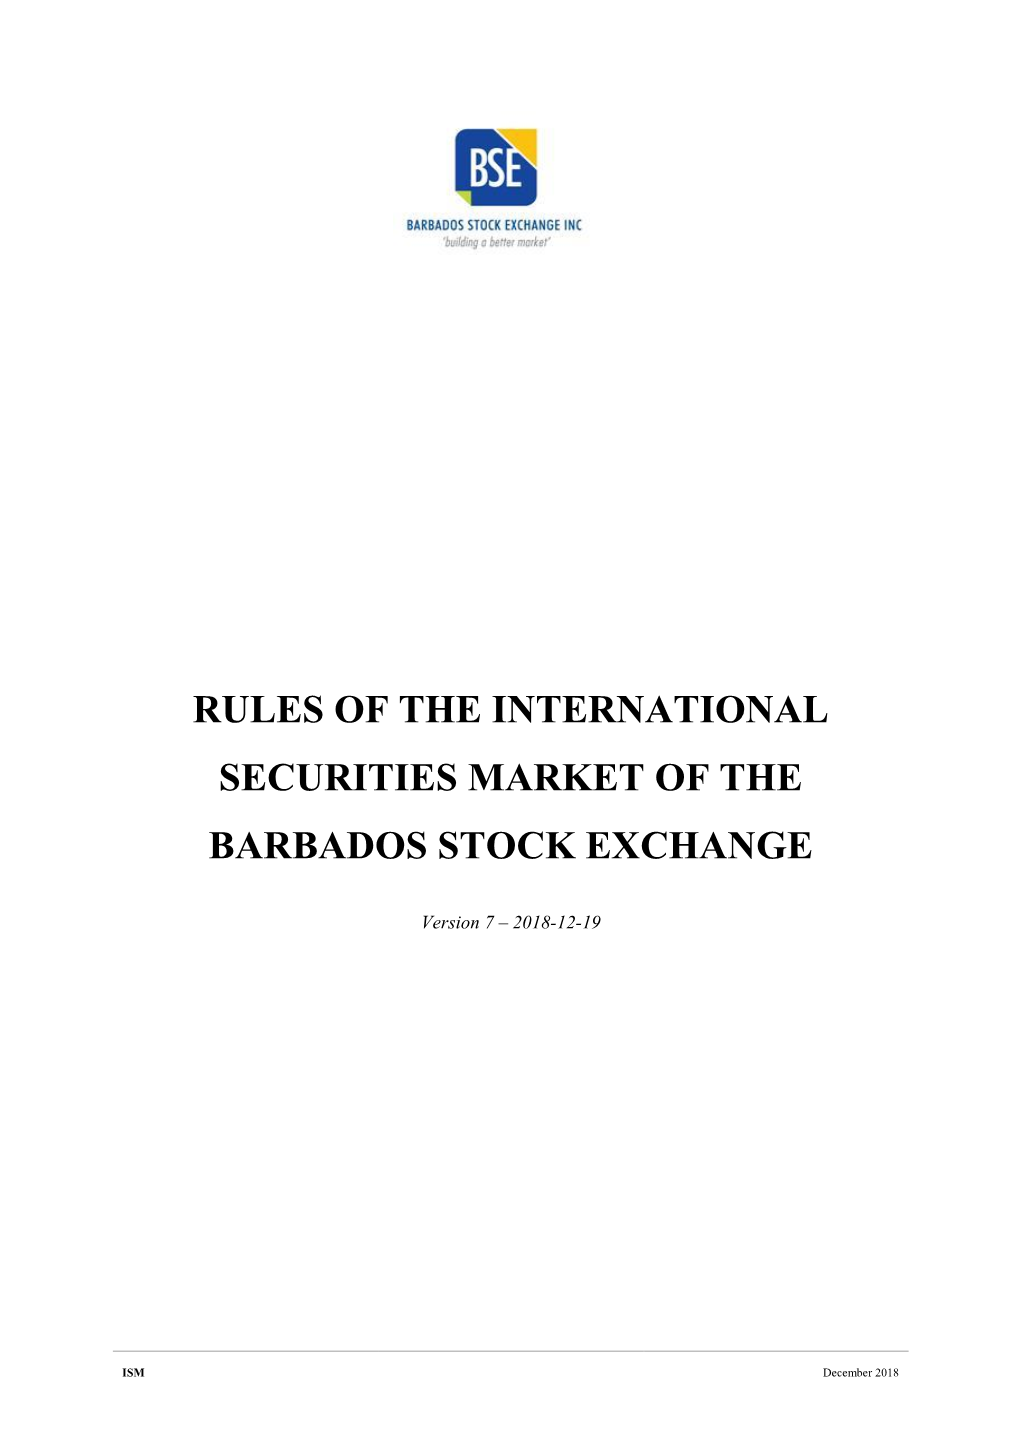 Rules of the International Securities Market of the Barbados Stock Exchange